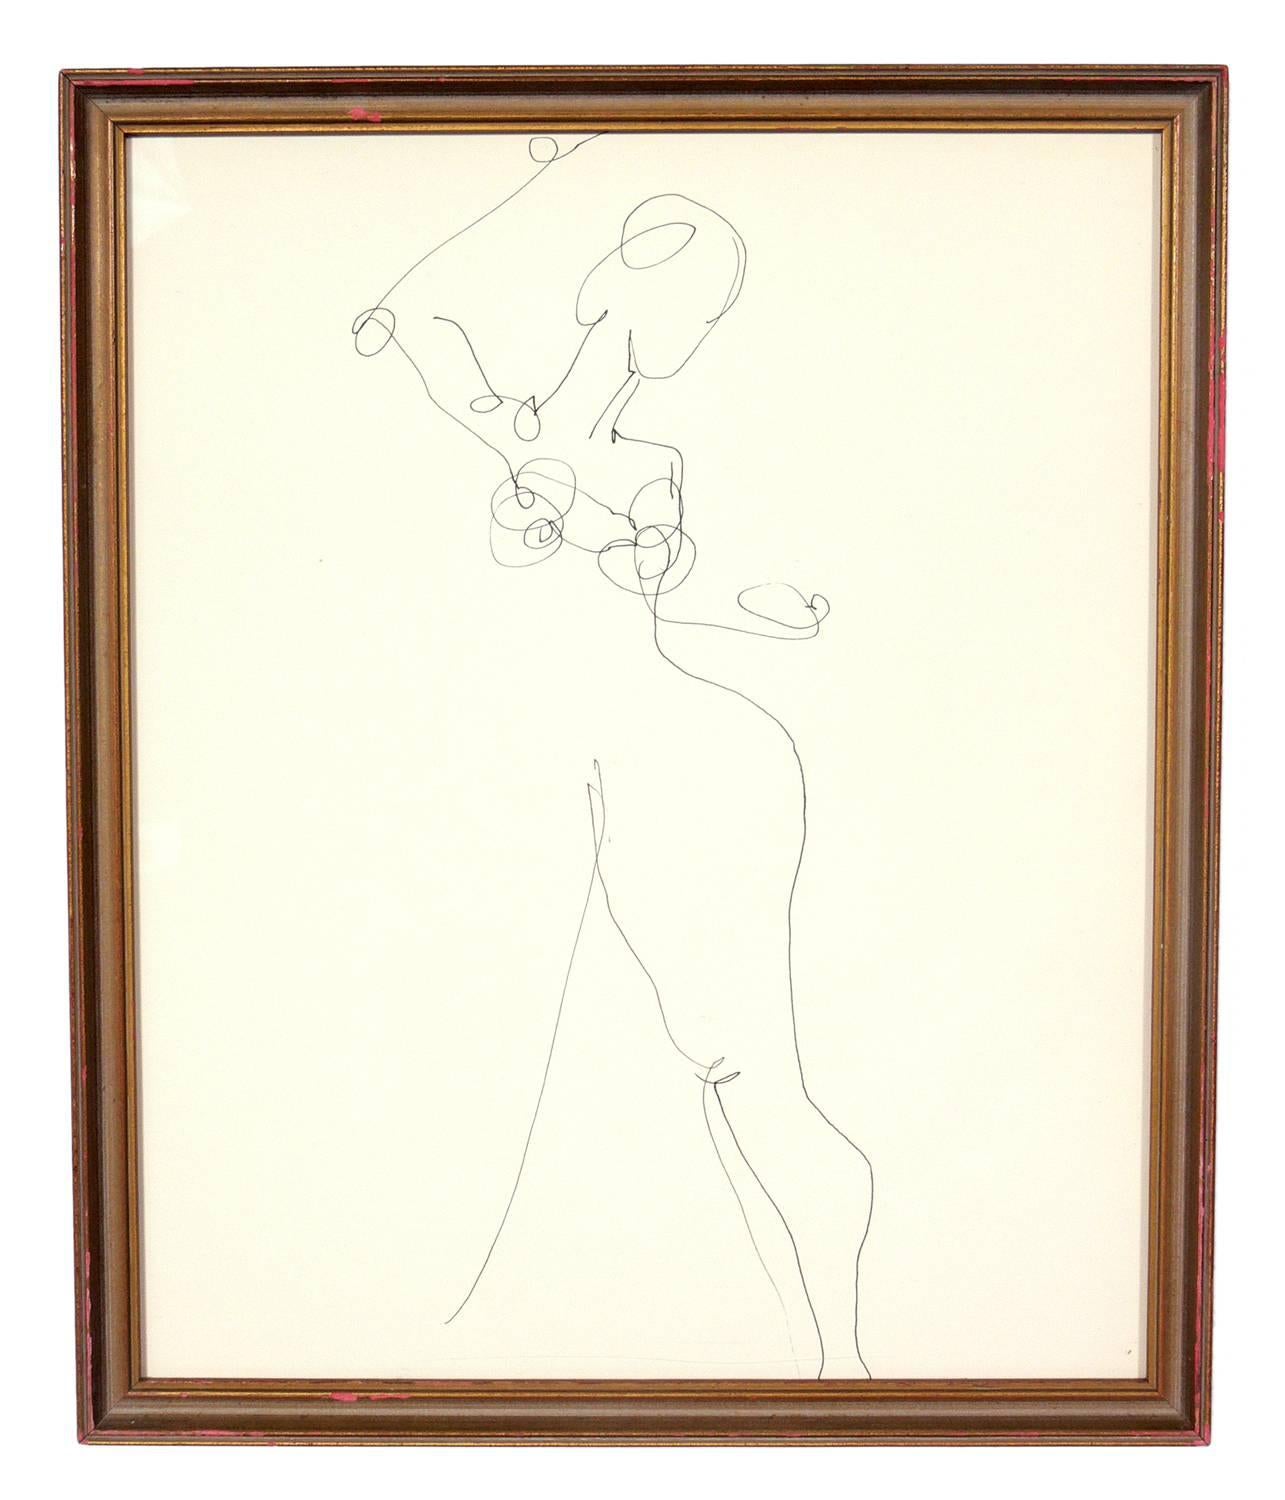 Selection of Figural Line Drawings or Gallery Wall by Miriam Kubach, American, circa 1950s. Please see our other 1stdibs listings for more Miriam Kubach works. 
The top left drawing measures 17